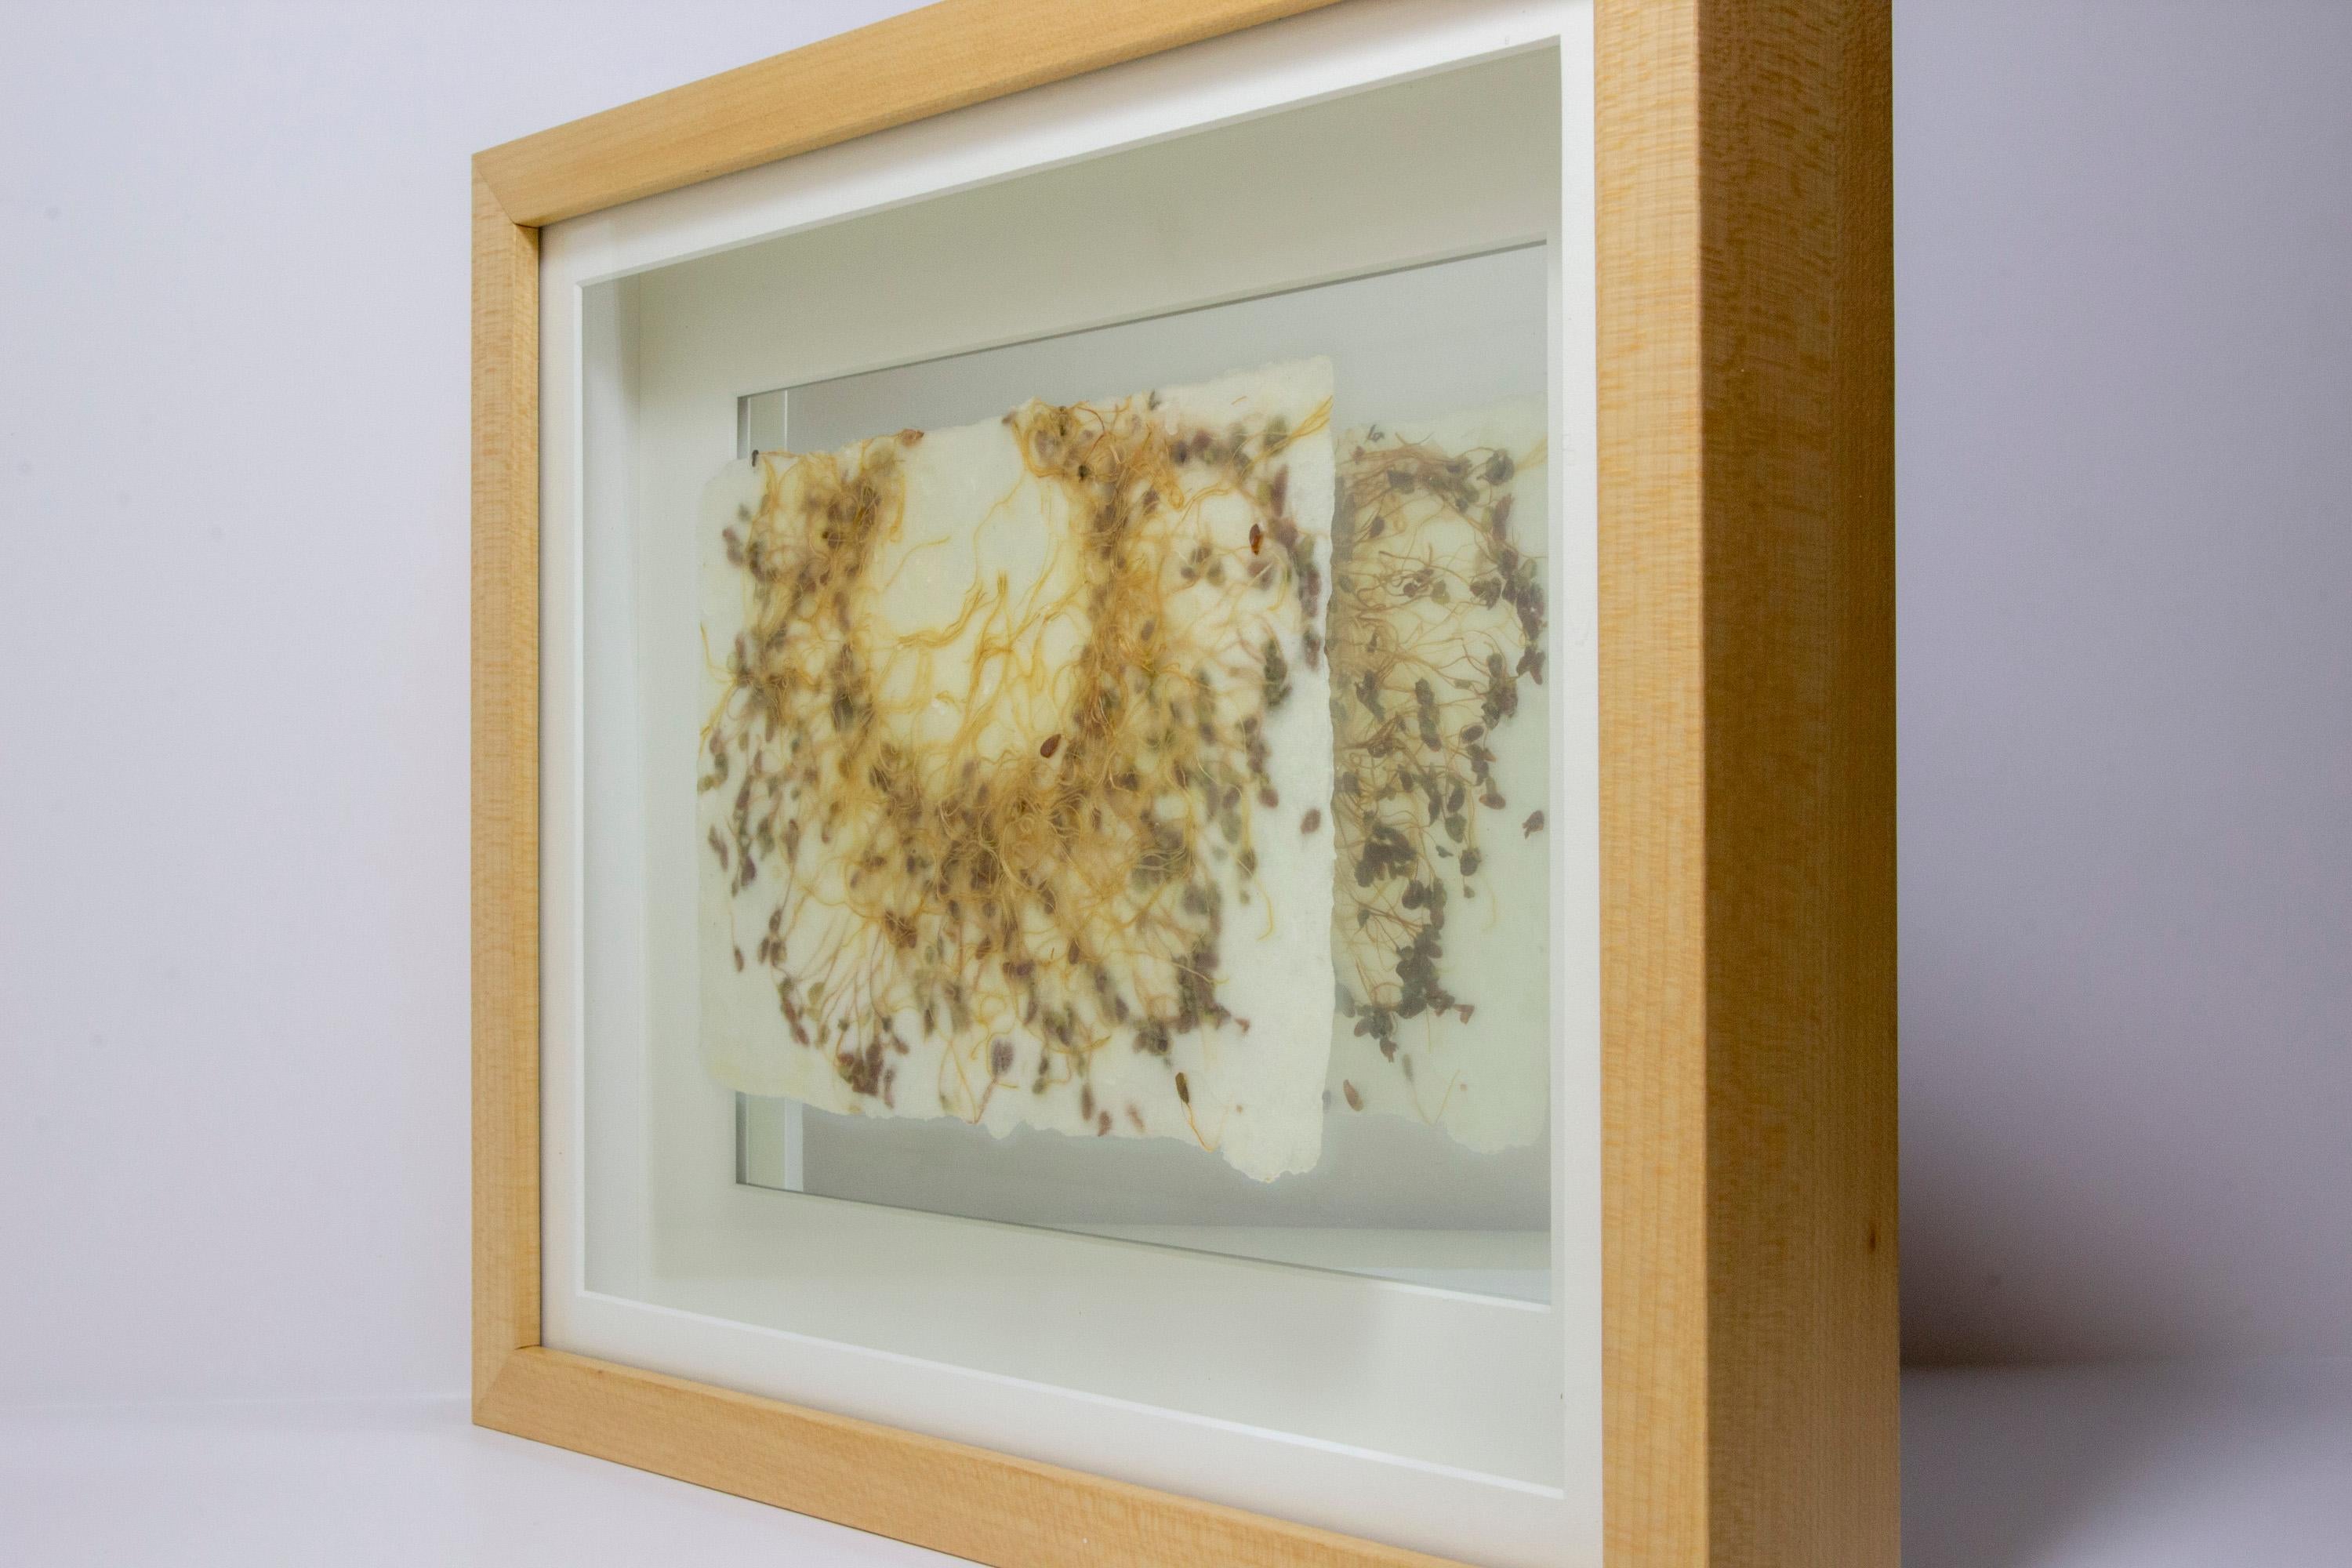 Michele Brody, Drawing Roots: Fairy Ring, Handmade Paper, Flax Sprouts, Wax, 11